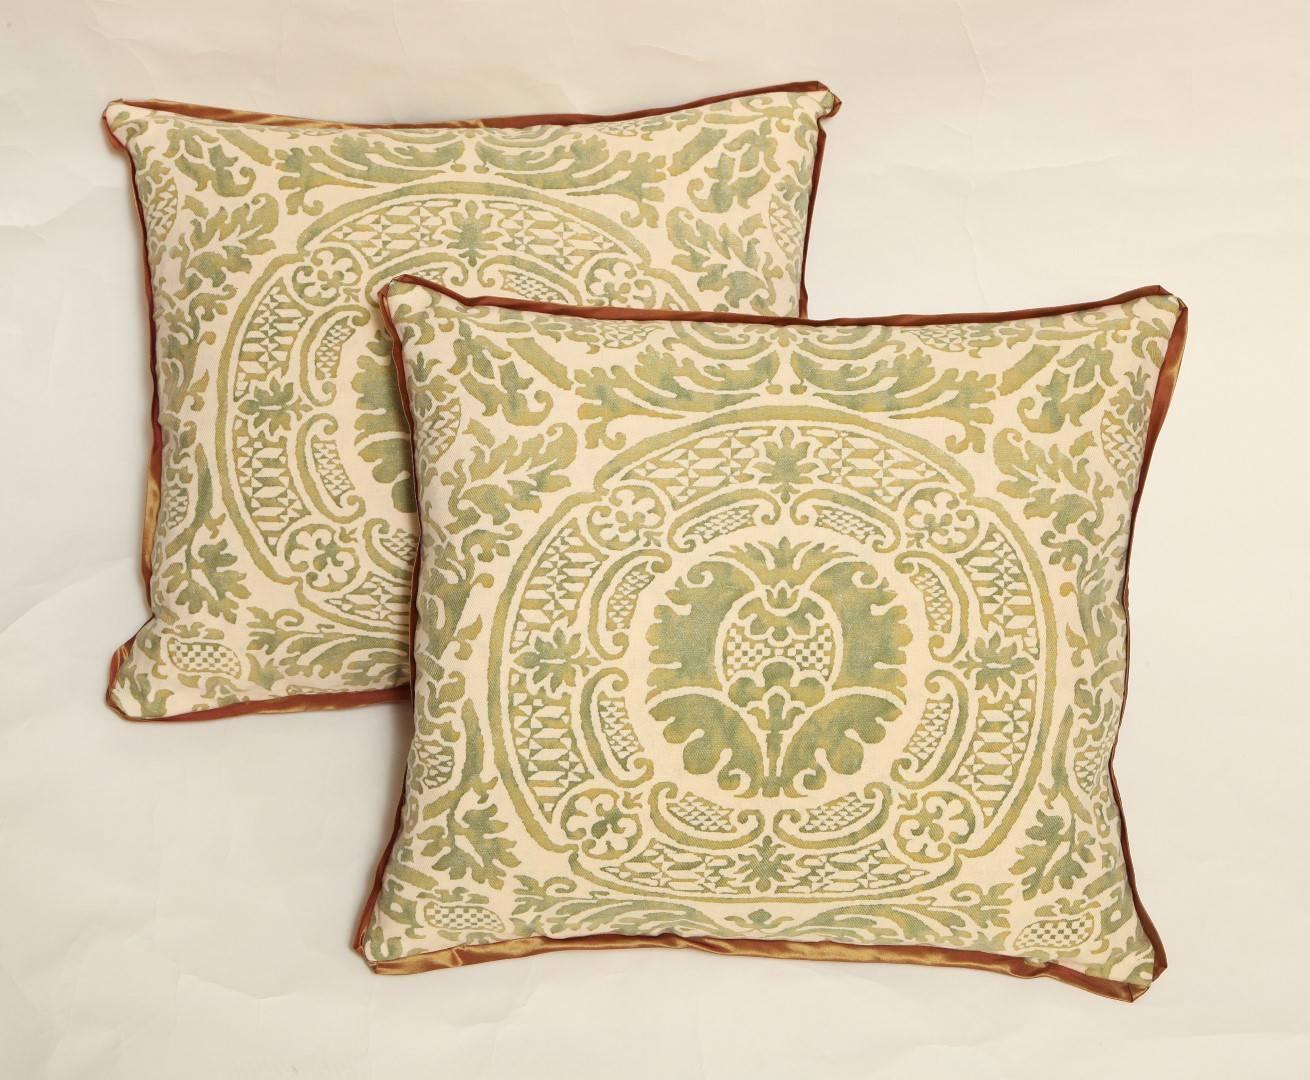 A pair of Fortuny fabric cushions in the Orsini pattern, blood orange silk blend backing and bias silk trim, the pattern a 17th century Italian design named for one of the most princely families in medieval Italy and renaissance Rome, the Orsini.